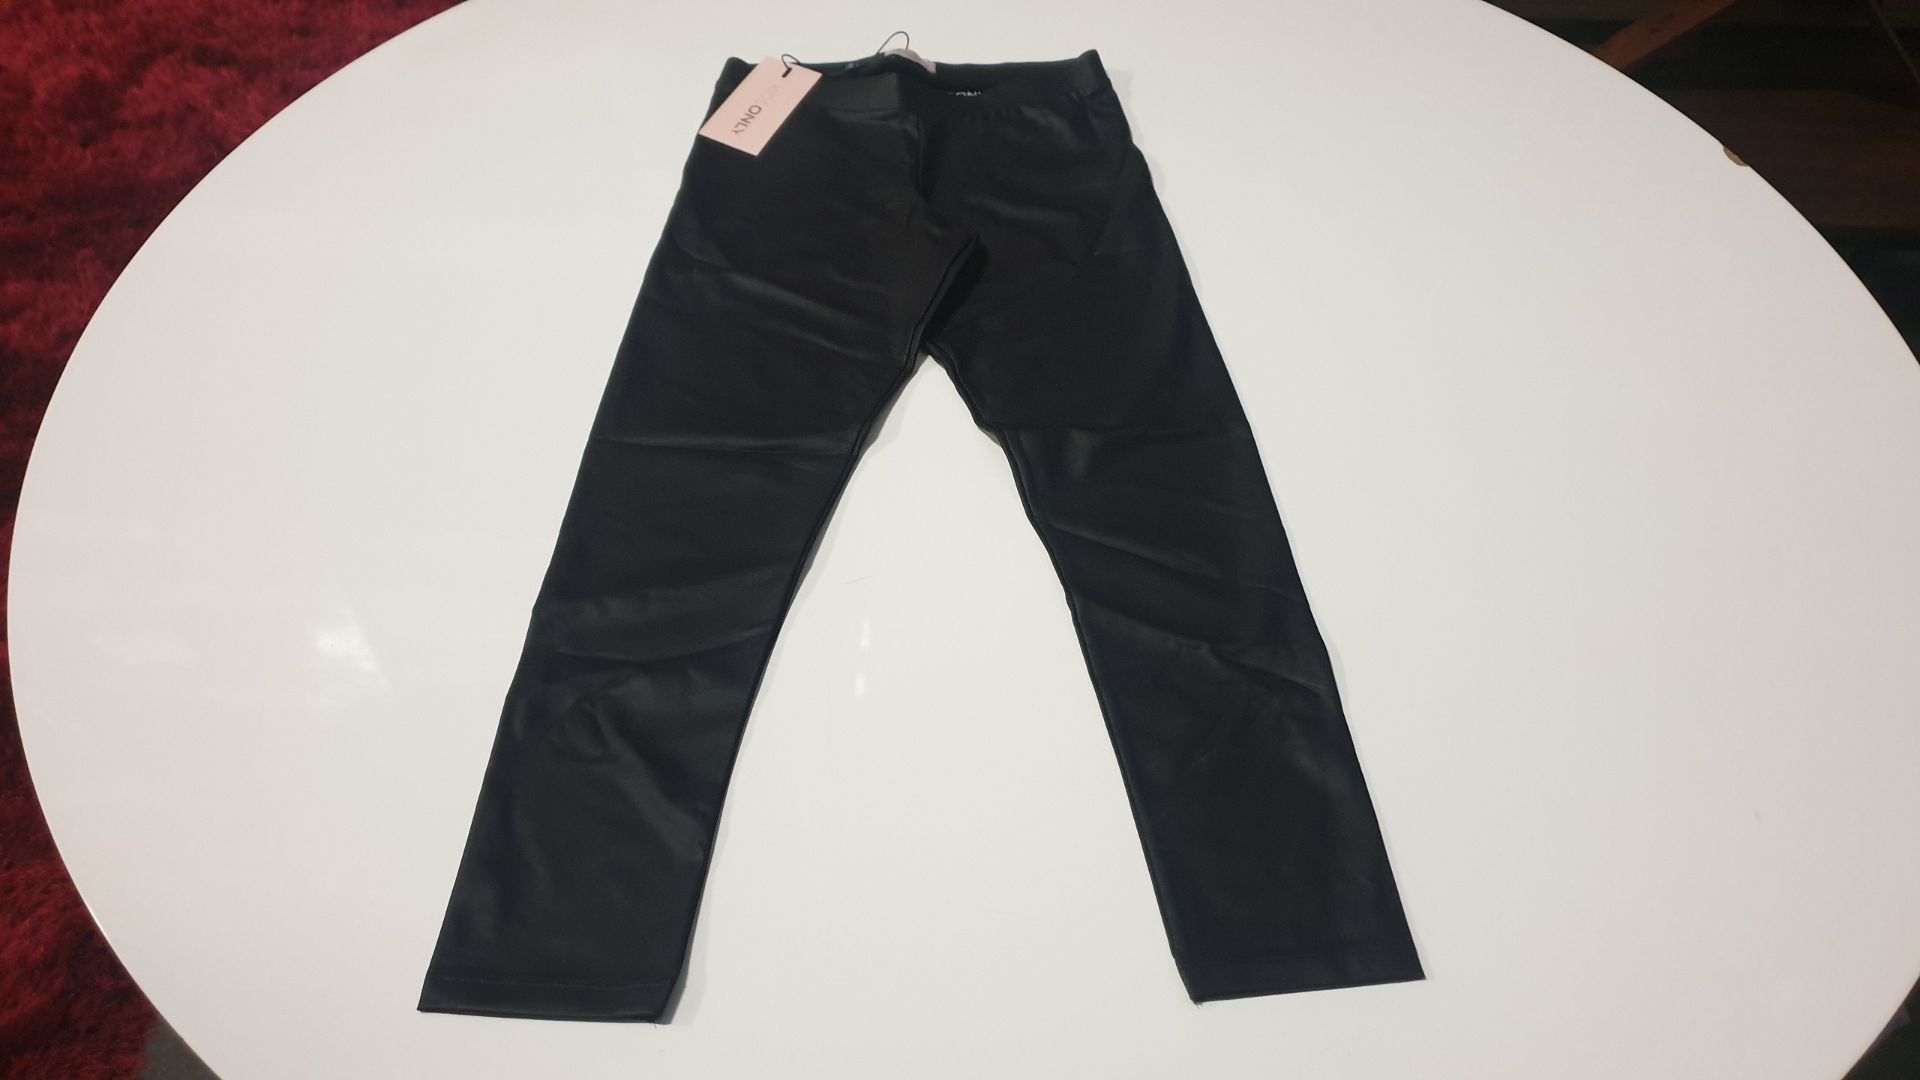 10 X BRAND NEW KIDS ONLY LEATHER LEGGINGS BLACK SIZE 8 - 9 YEARS